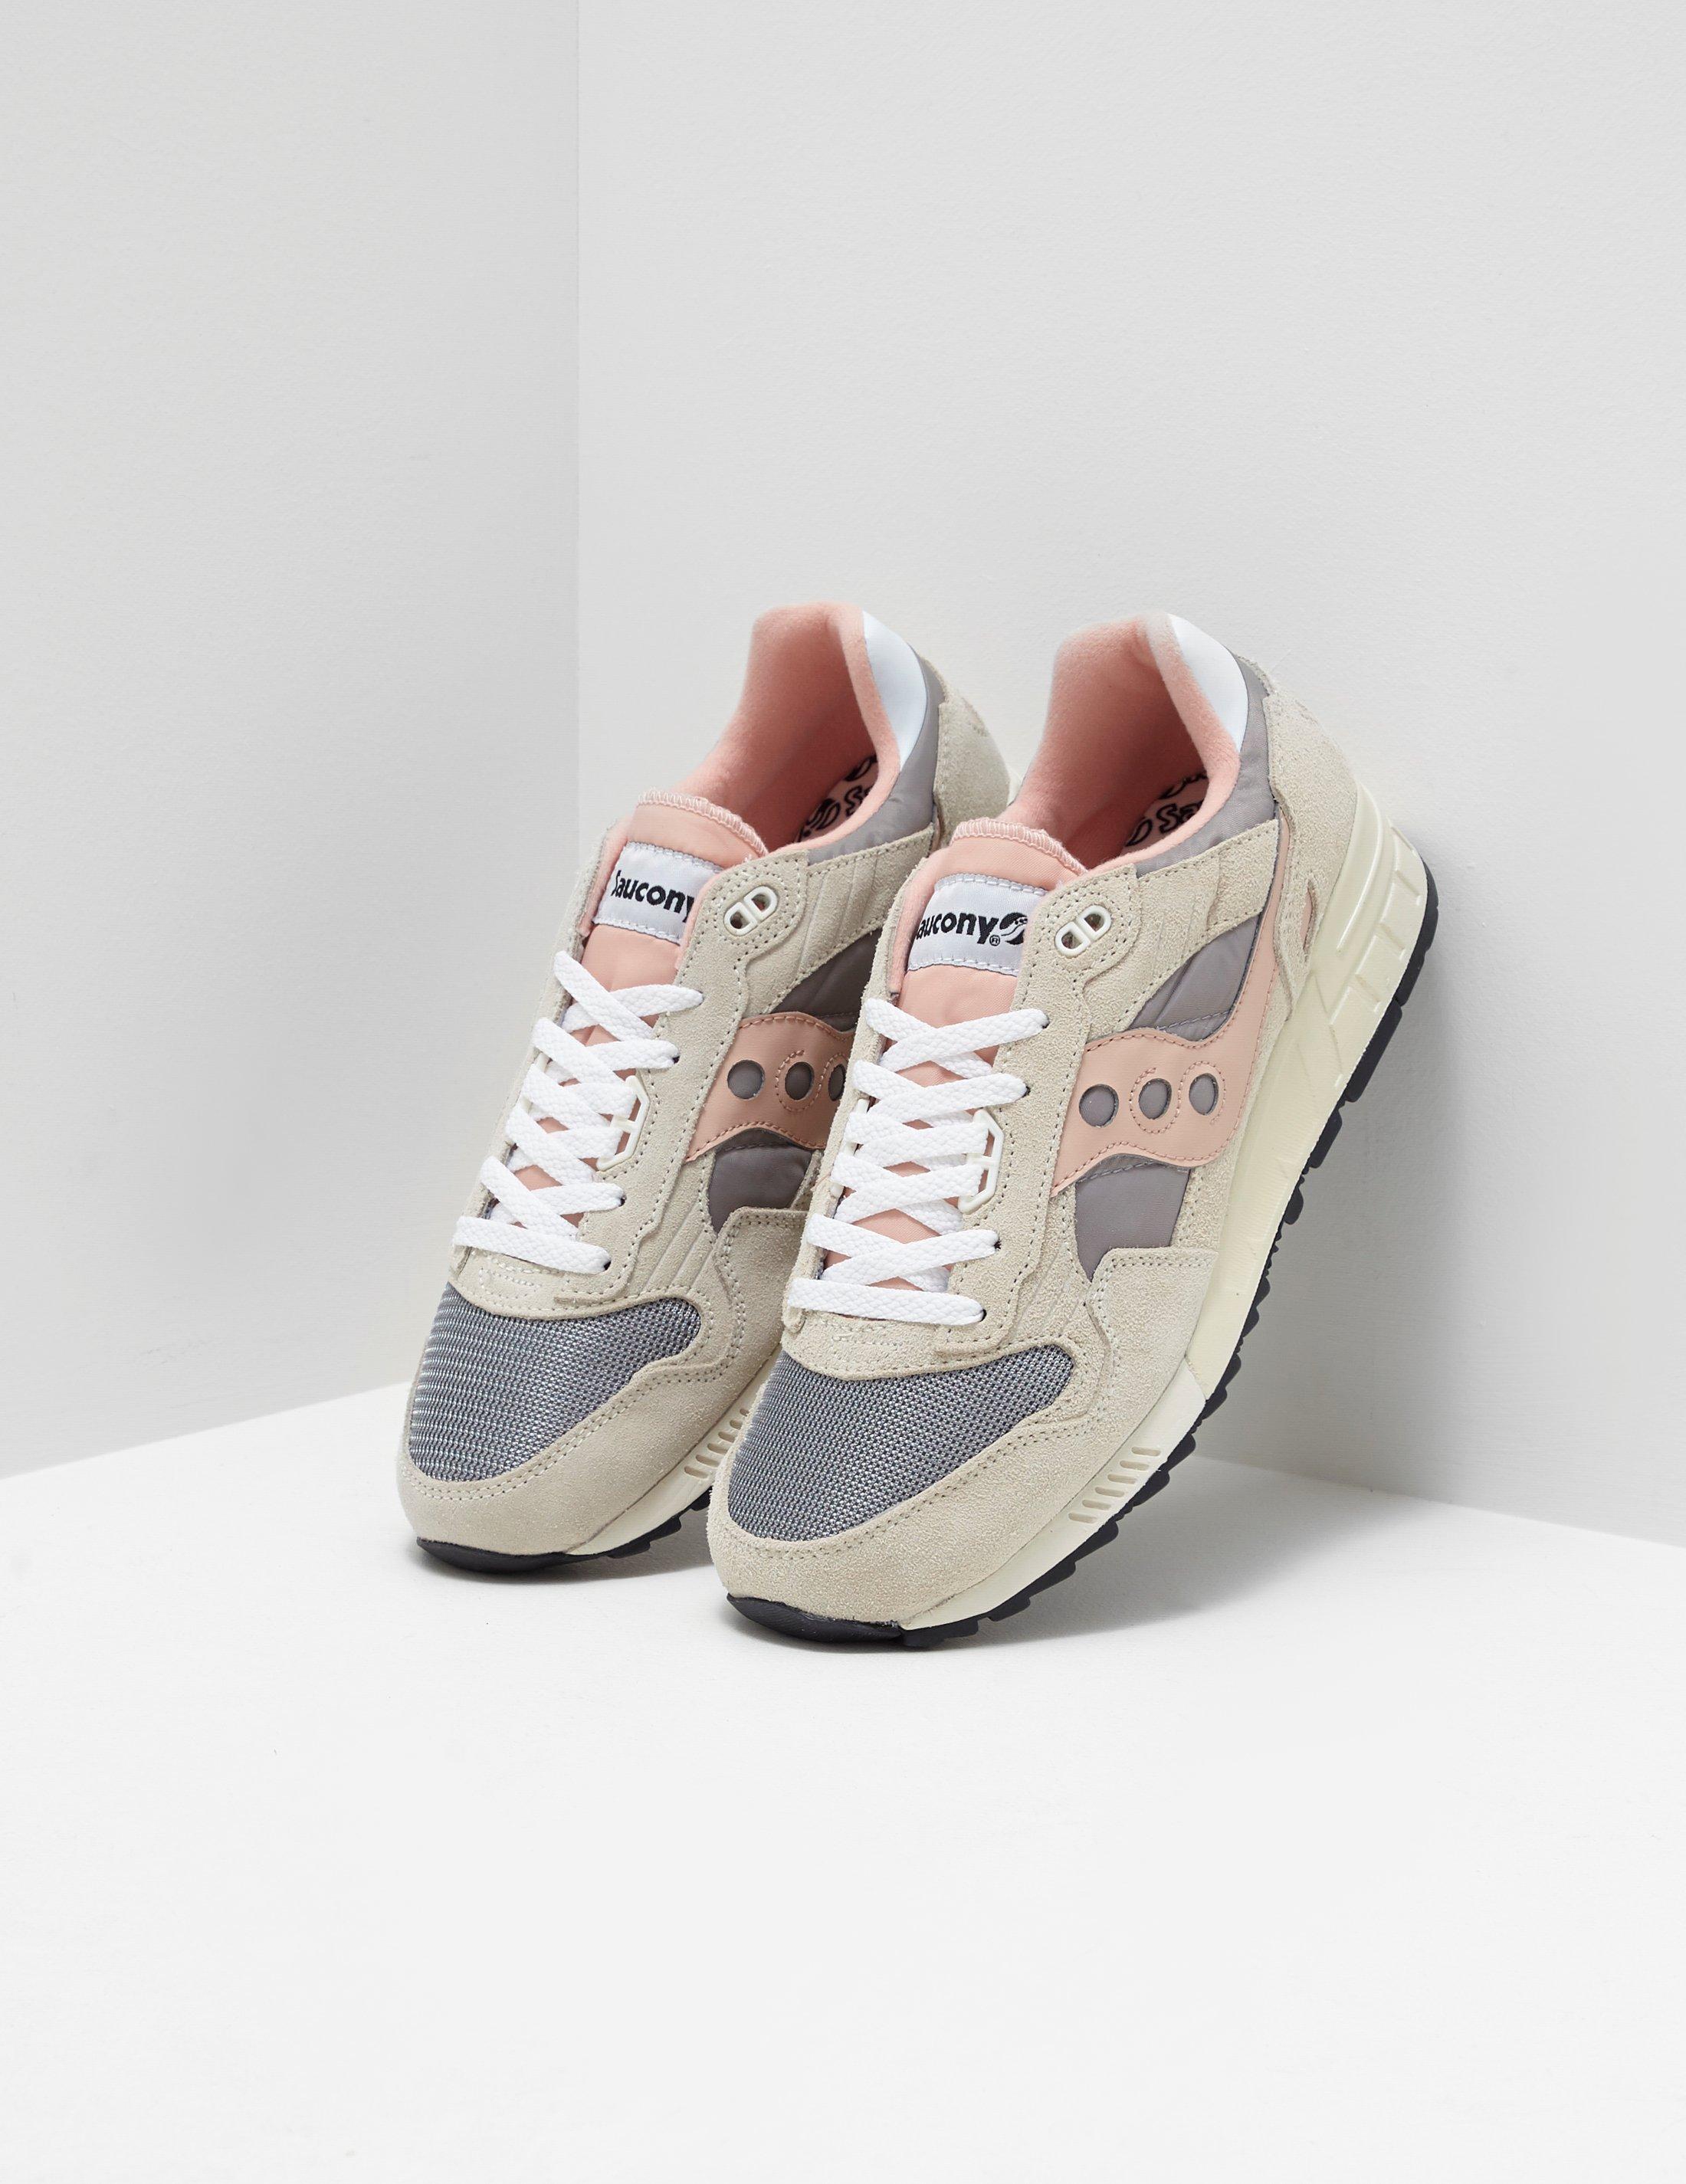 saucony shadow 5000 vintage off white